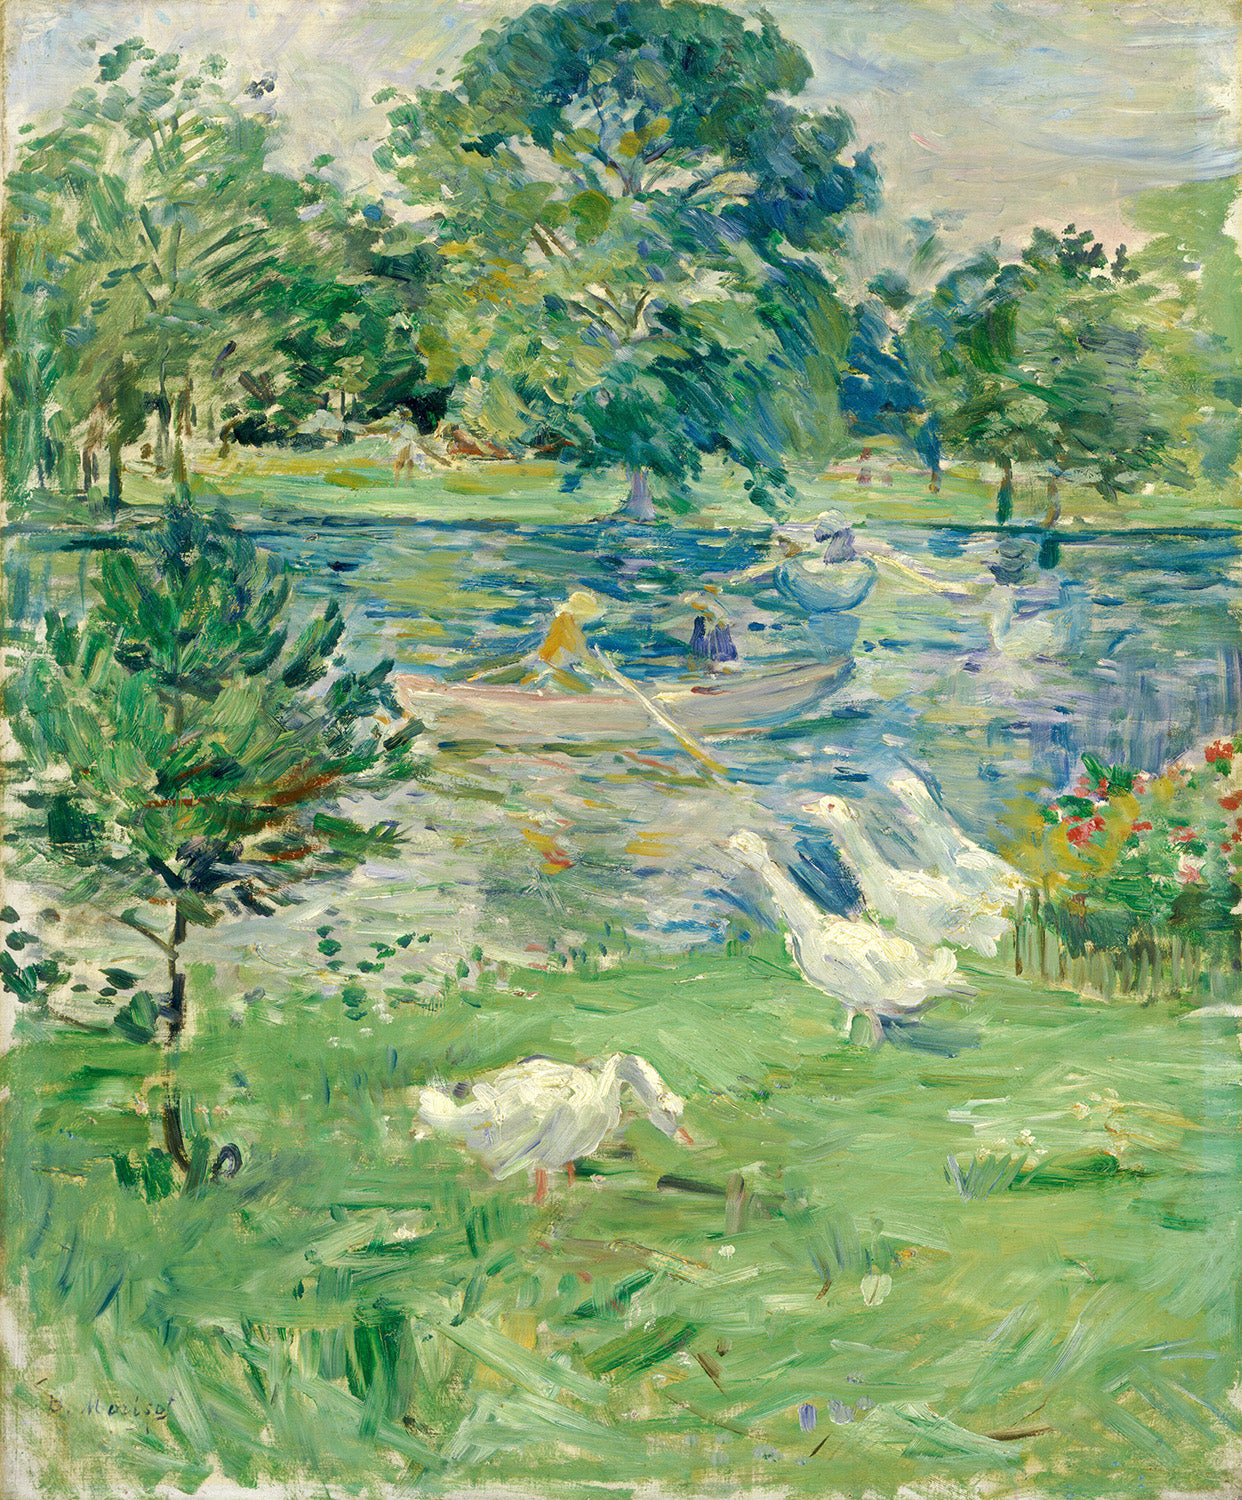 Girl in a Boat with Geese by Berthe Morisot Art Print